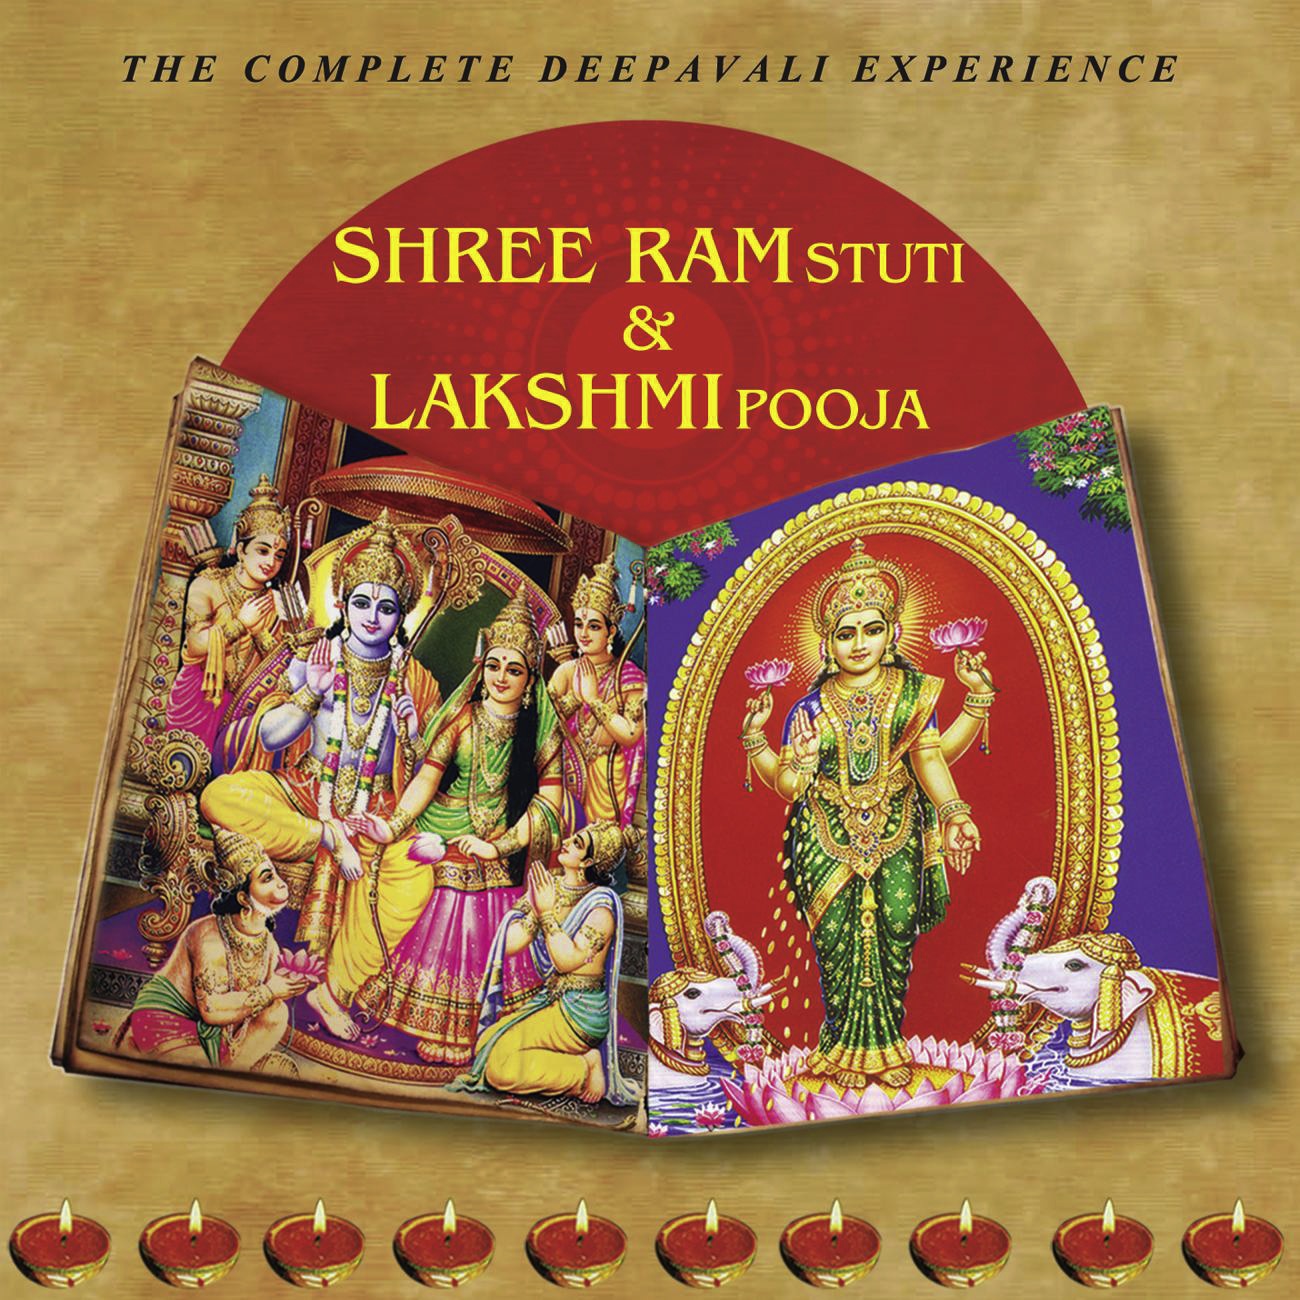 Shri Ram Stuti By Lord Shiv from the 7th Chapter of Ramcharitmanas